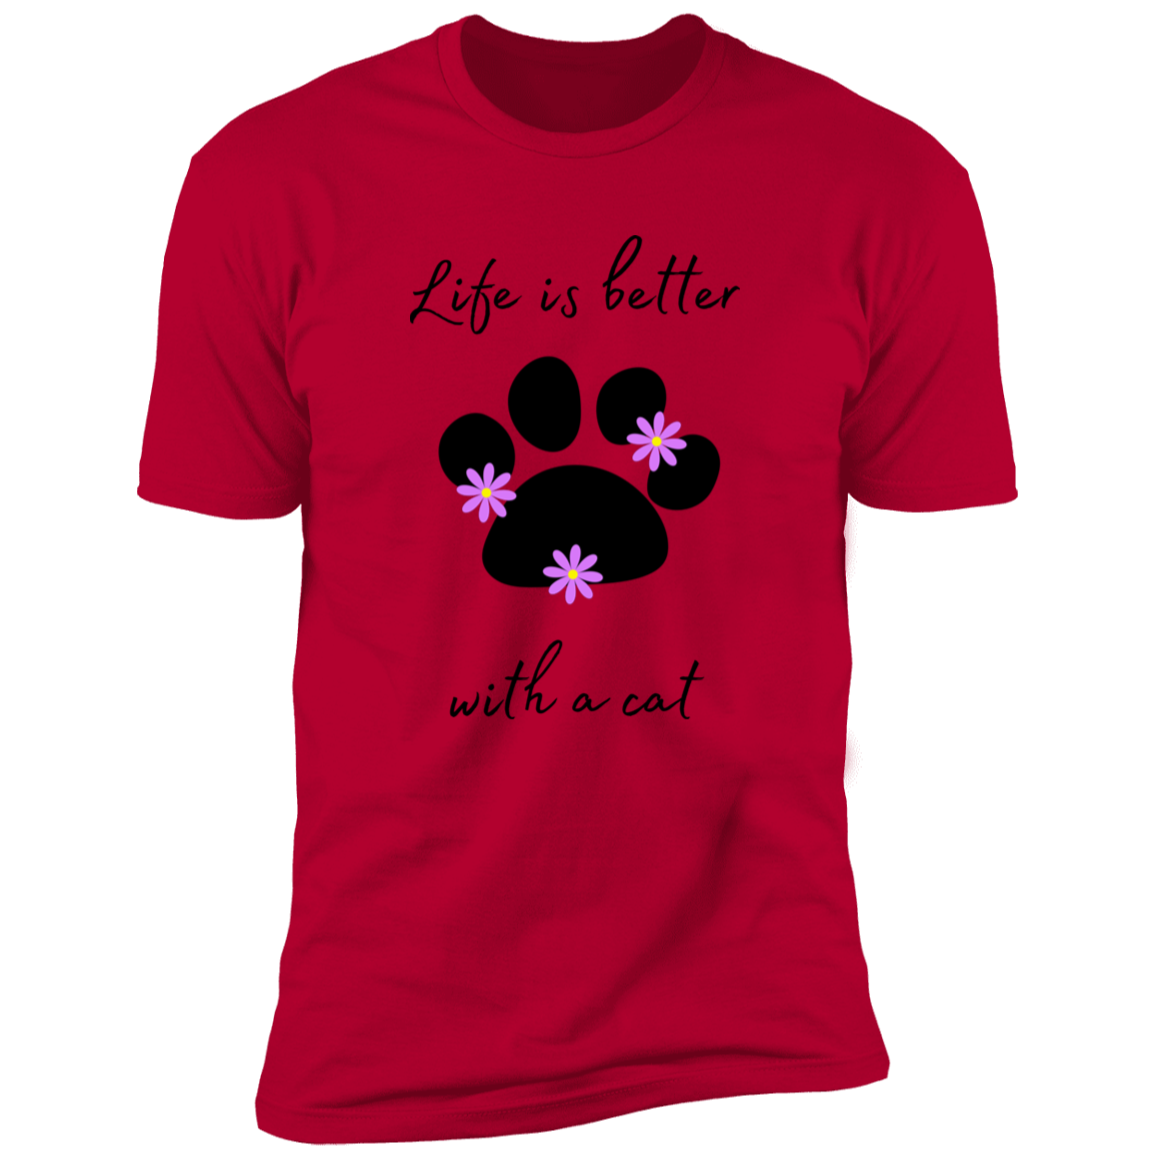 Life is Better with a Cat (Flower) cat t-shirt, cat shirt for humans, cat themed t-shirt, in red